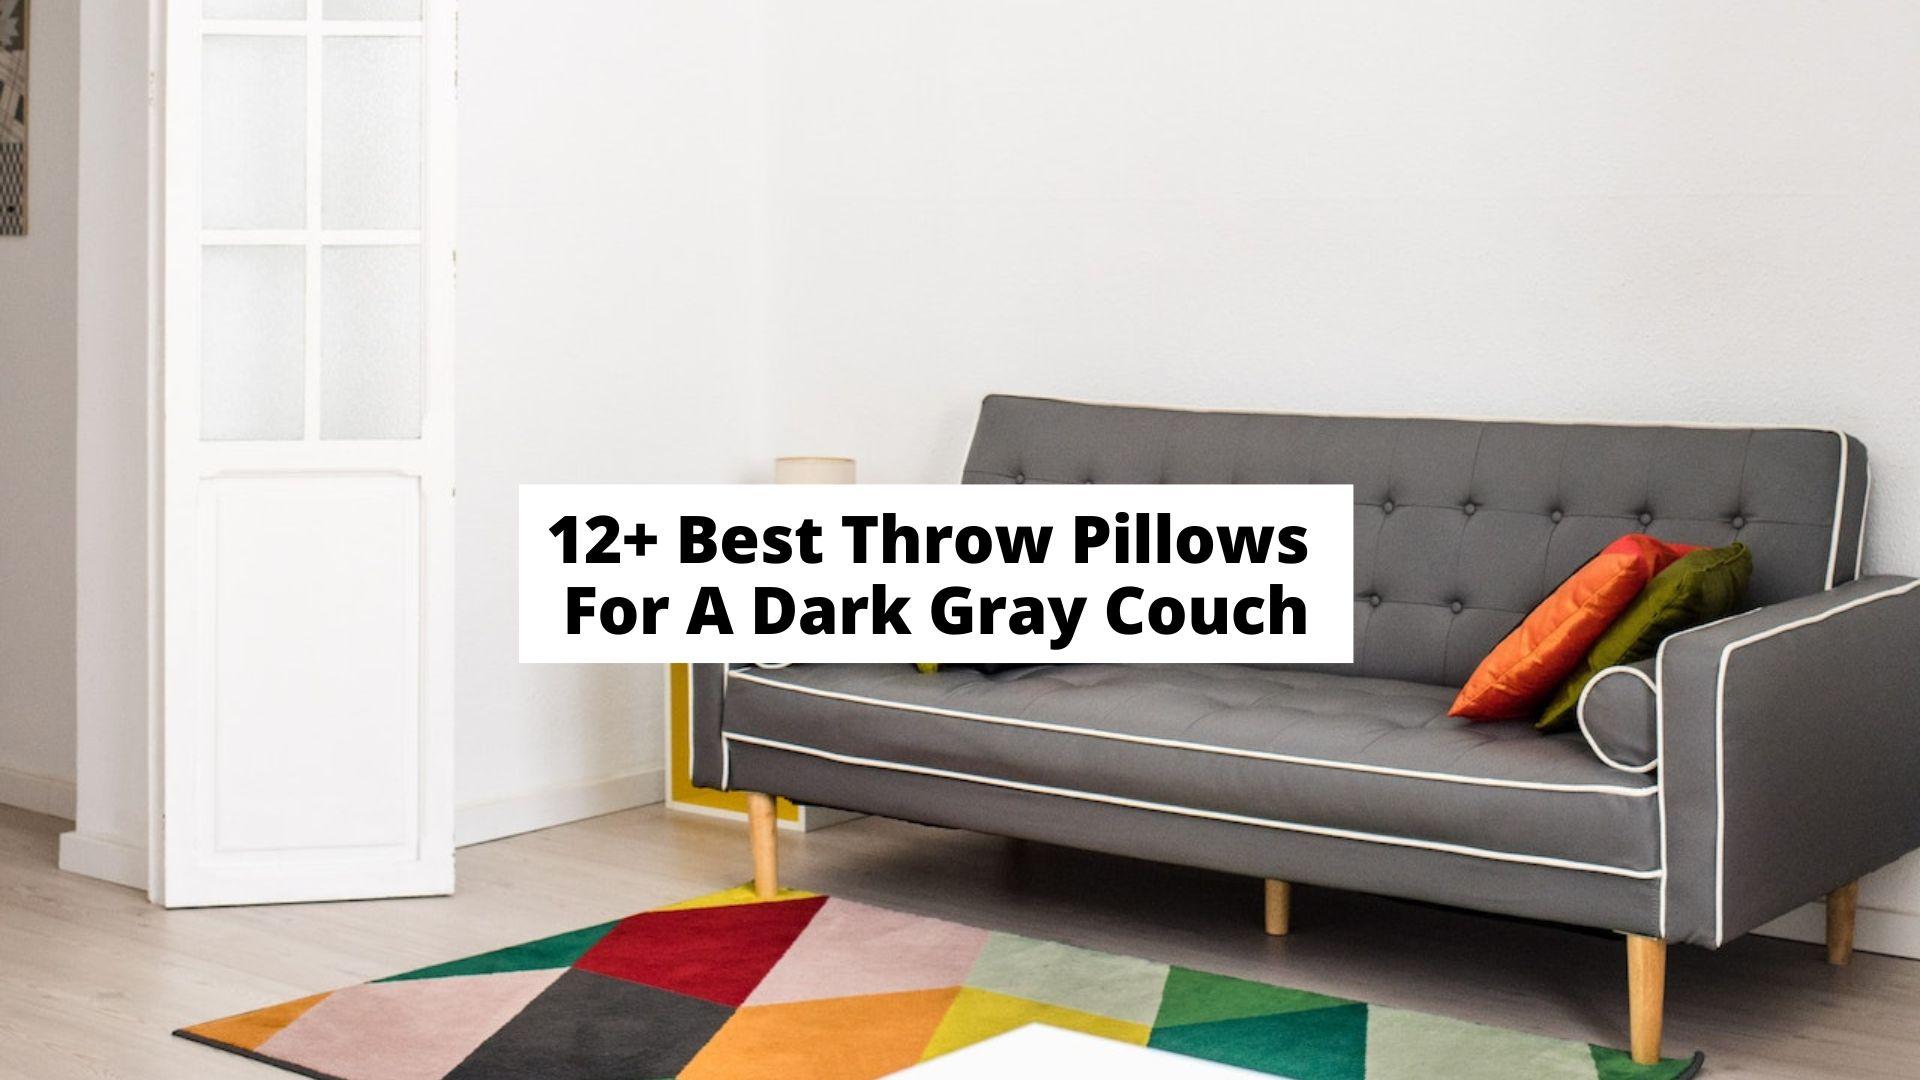 Best Throw Pillows For A Dark Gray Couch